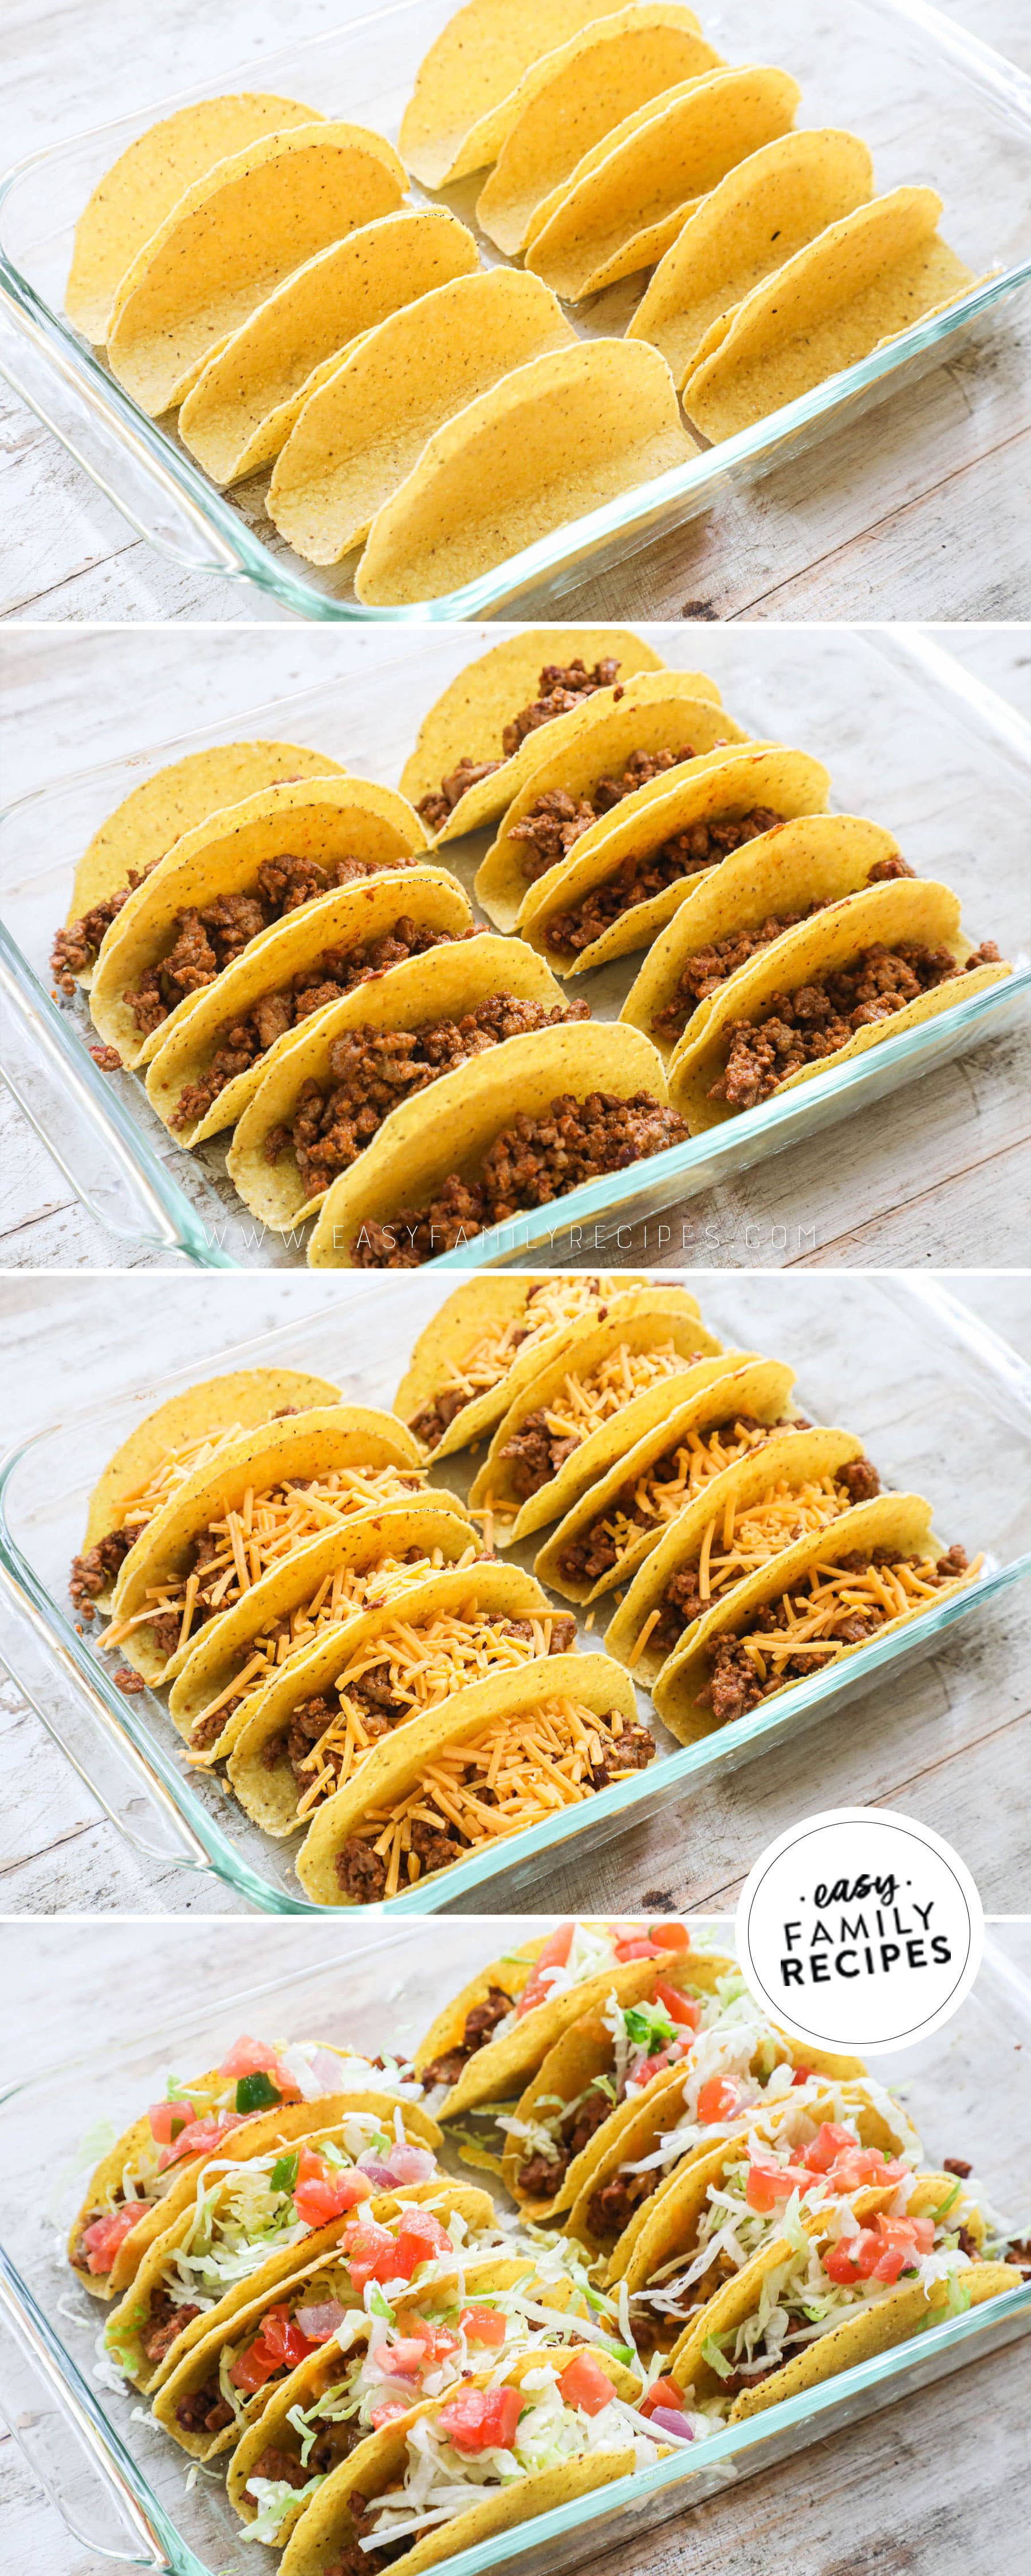 Step by step photo for making baked crispy ground beef tacos.  1. lay out shells in the pan 2. fill with cooked ground beef filling 3. top with cheese and bake 4. top with toppings like shredded lettuce and pico de gallo.